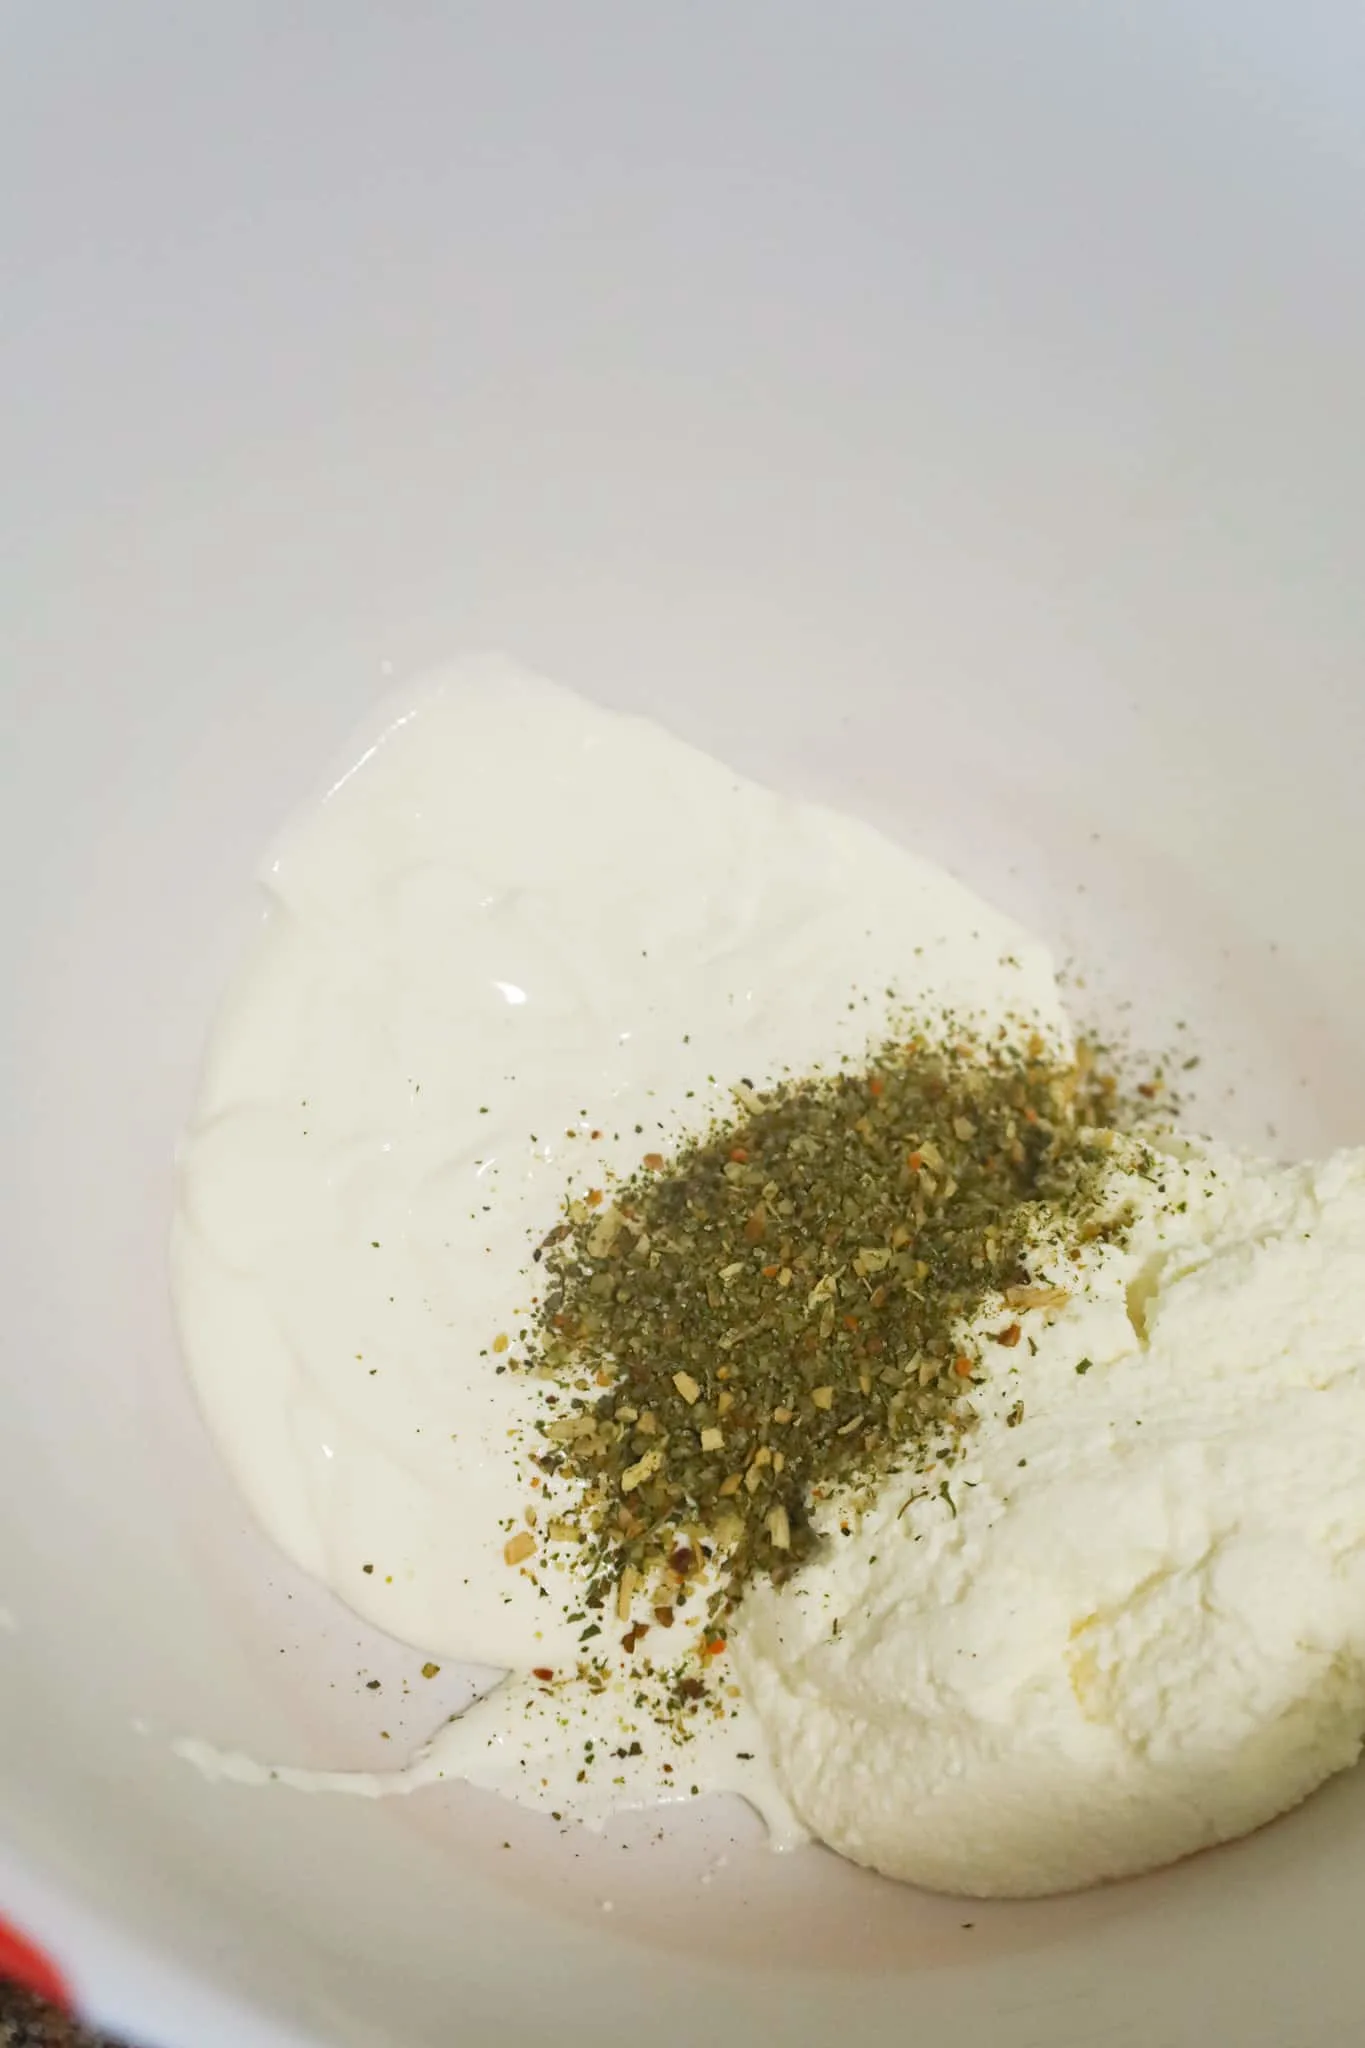 Italian seasoning on top of sour cream and ricotta in a mixing bowl